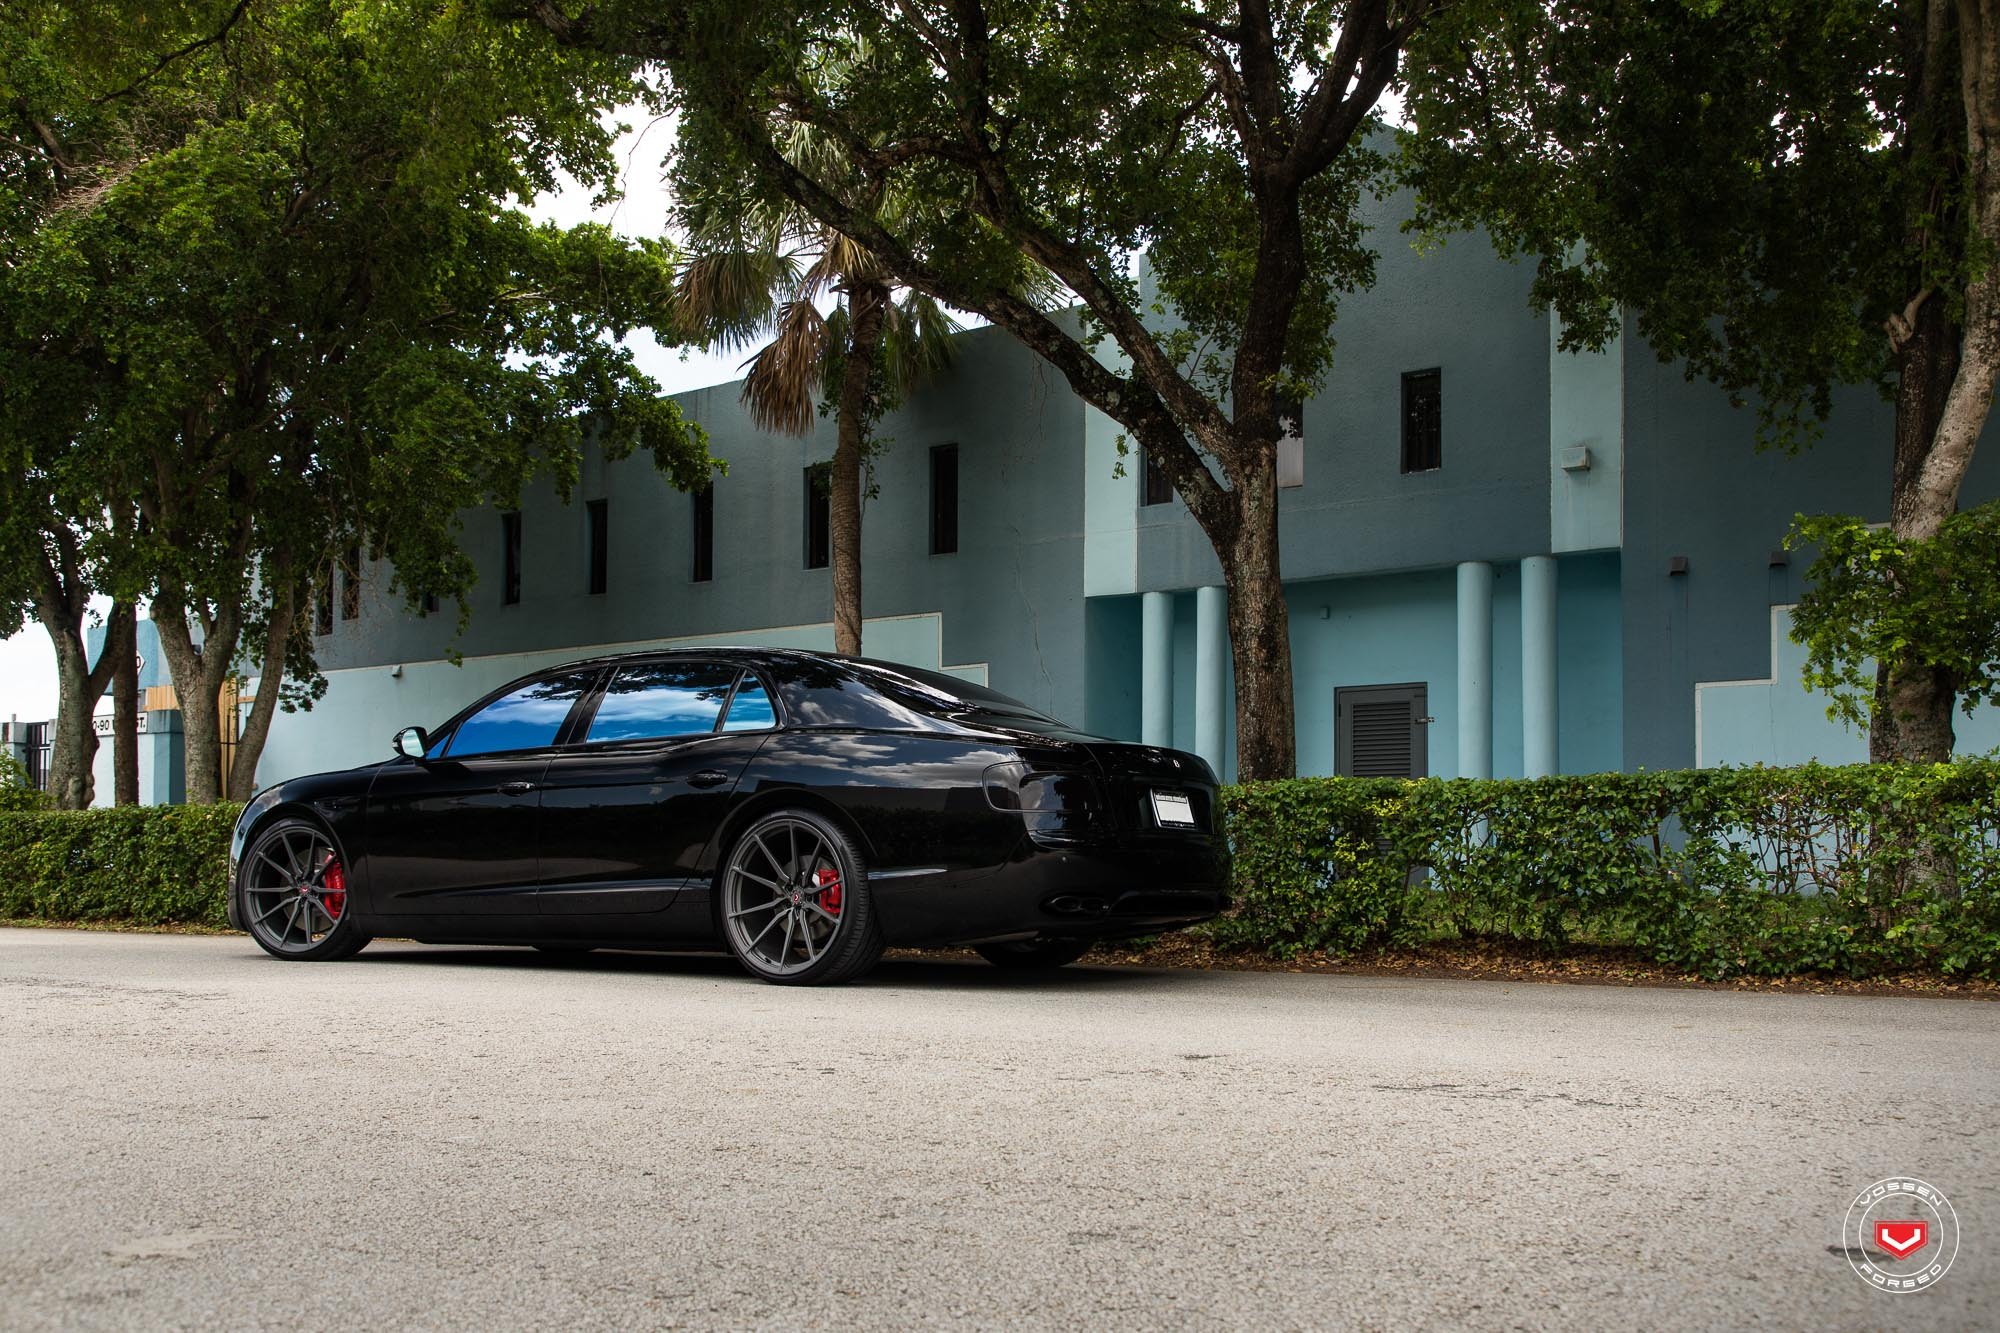 Black Bentley Flying-Spur with Dark Smoke Taillights - Photo by Vossen